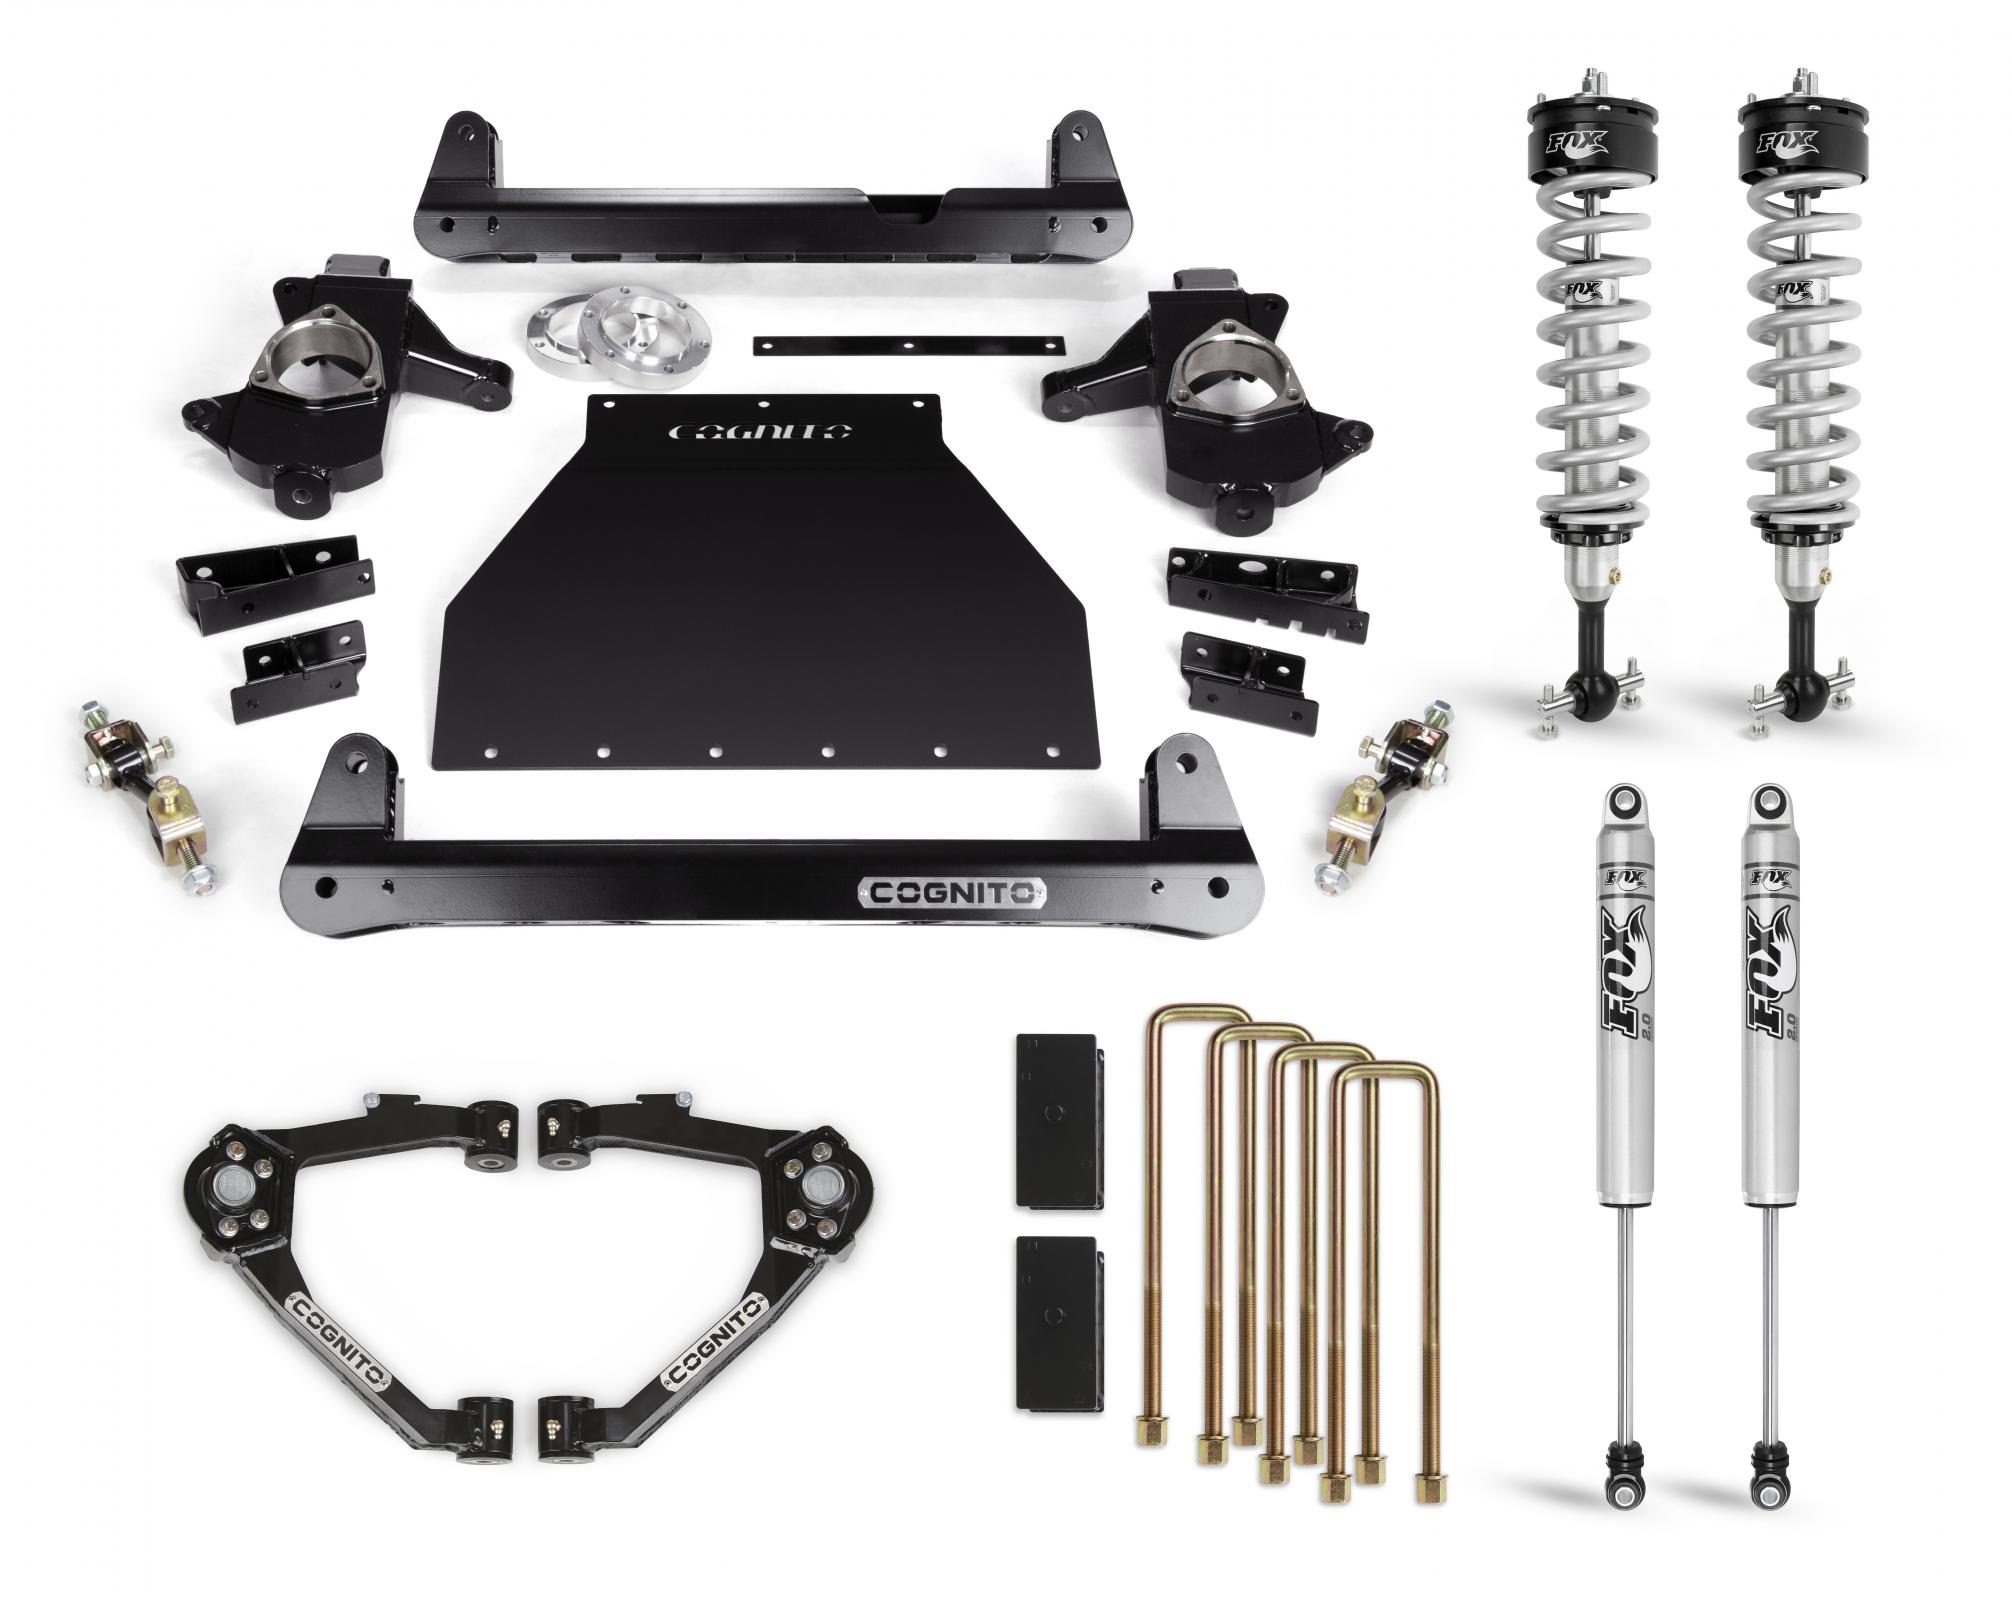 Cognito 6-Inch Performance Lift Kit with Fox PS IFP 2.0 Shocks for